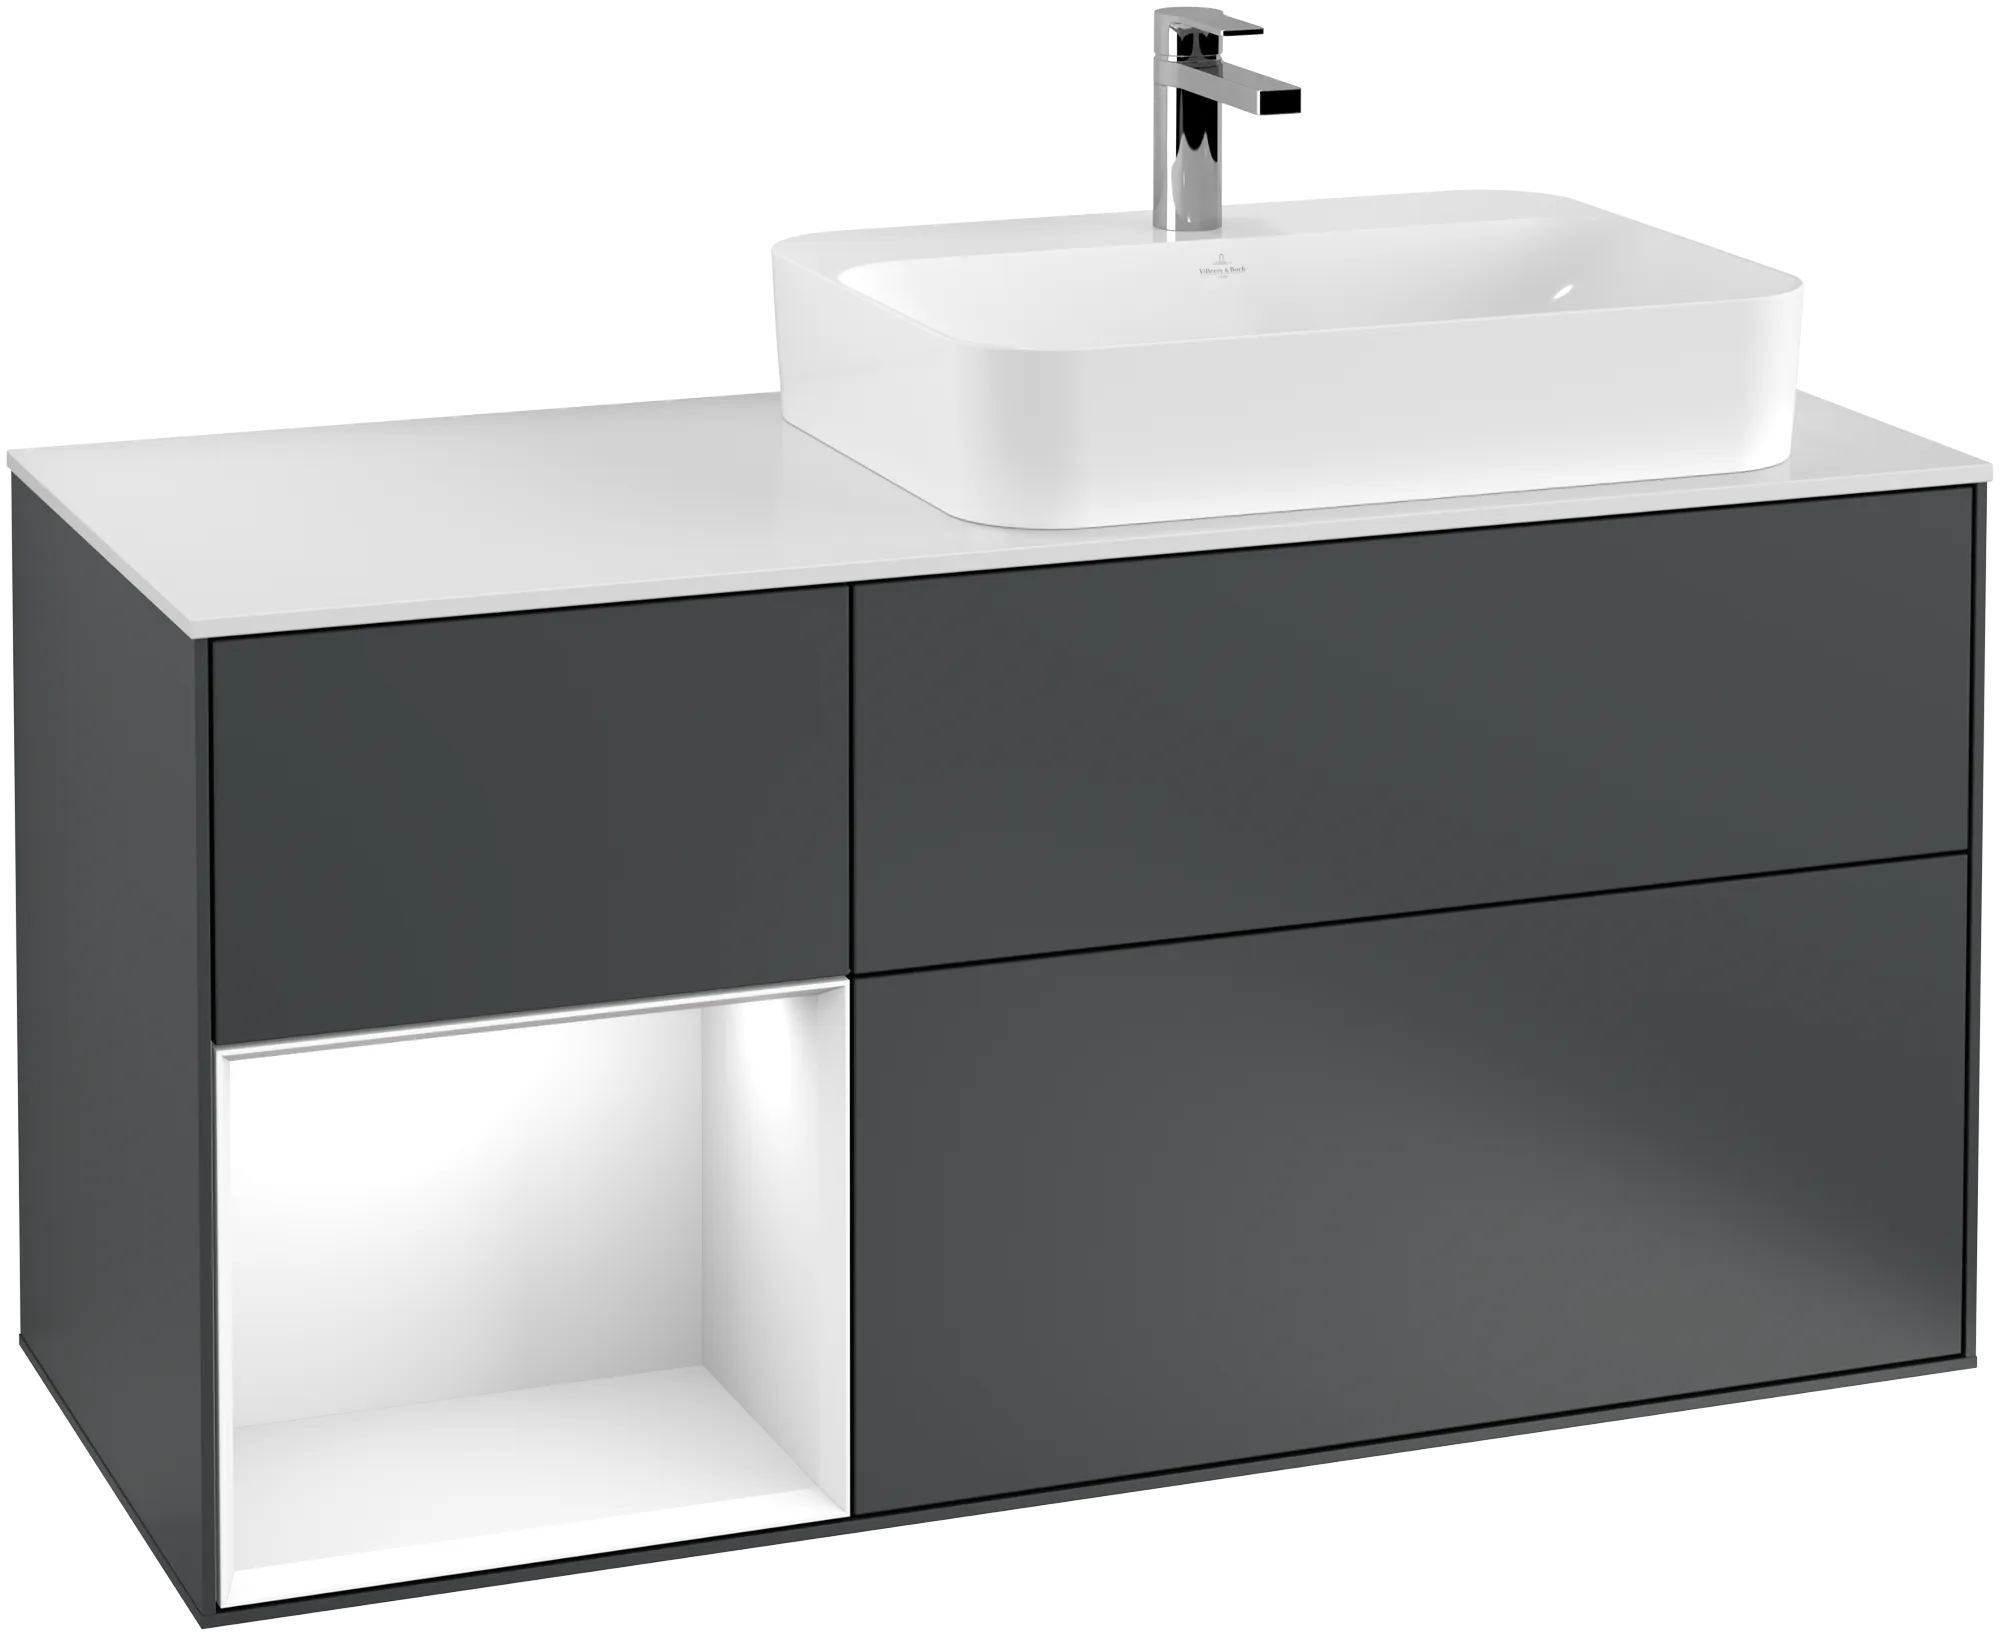 Picture of VILLEROY BOCH Finion Vanity unit, with lighting, 3 pull-out compartments, 1200 x 603 x 501 mm, Midnight Blue Matt Lacquer / Glossy White Lacquer / Glass White Matt #G391GFHG